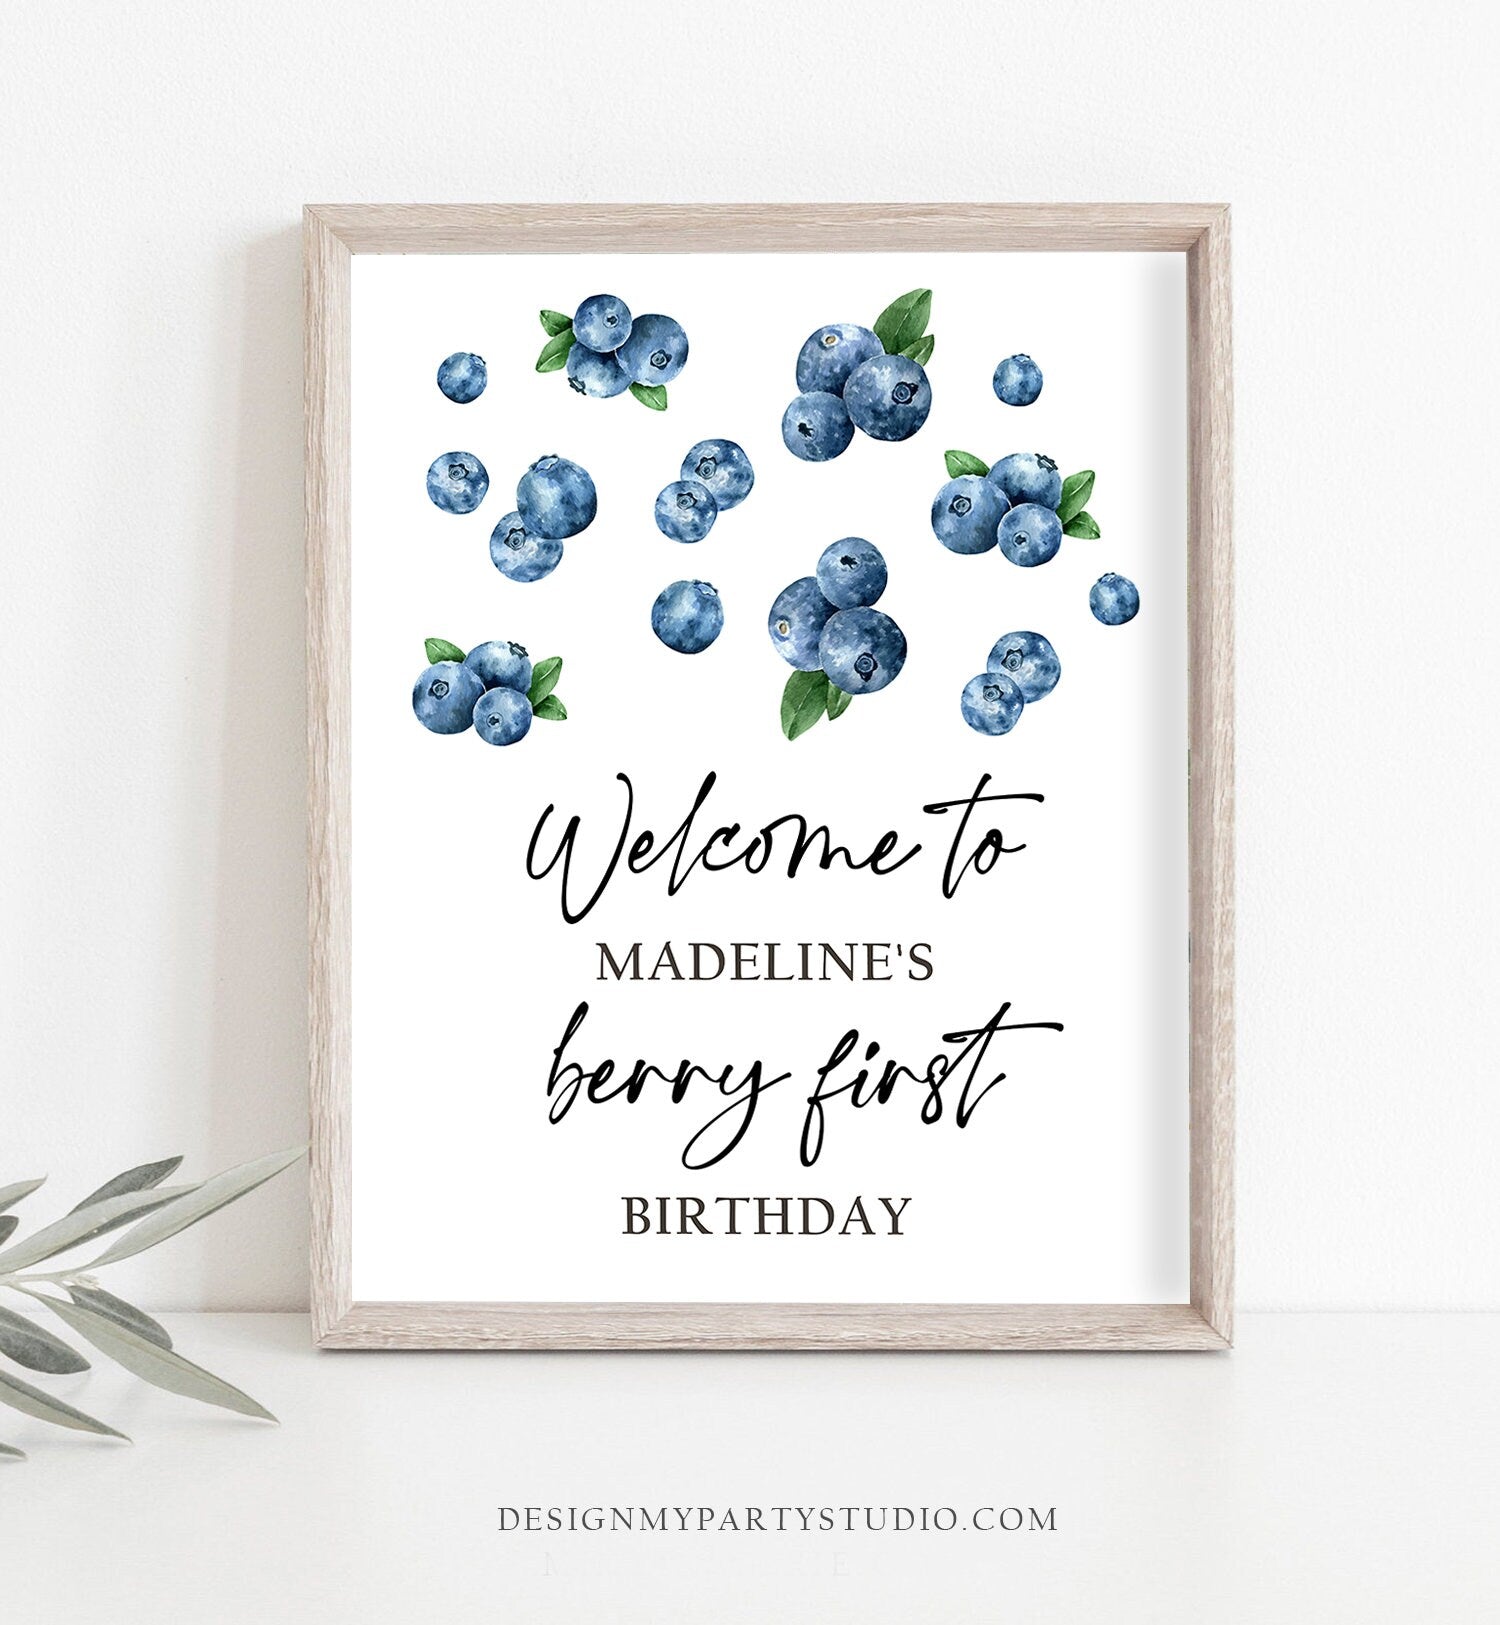 Editable Berry First Birthday Welcome Sign Blueberries Blueberry Party Welcome Farmers Market Boy Watercolor Template PRINTABLE Corjl 0399